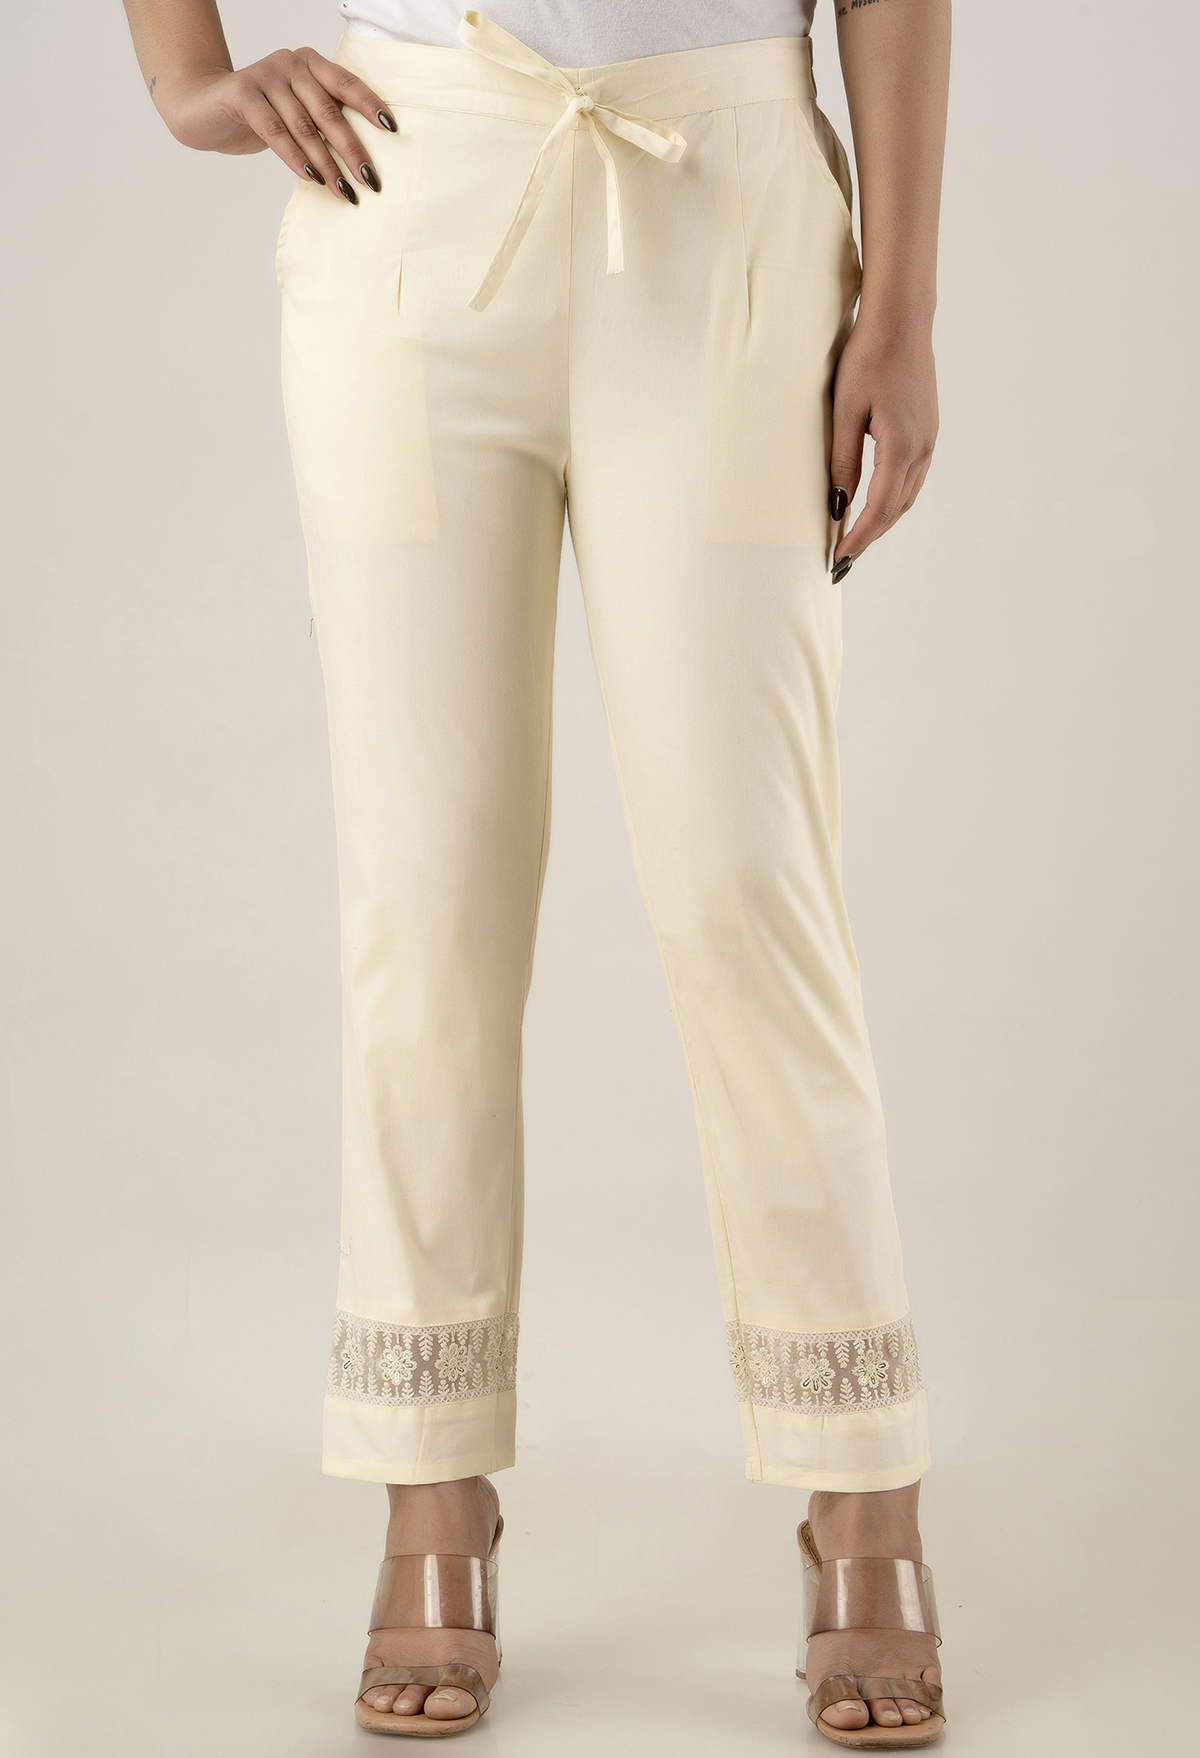 Boat Weekend High Waist Lace Pants in White Curves • Impressions Online  Boutique